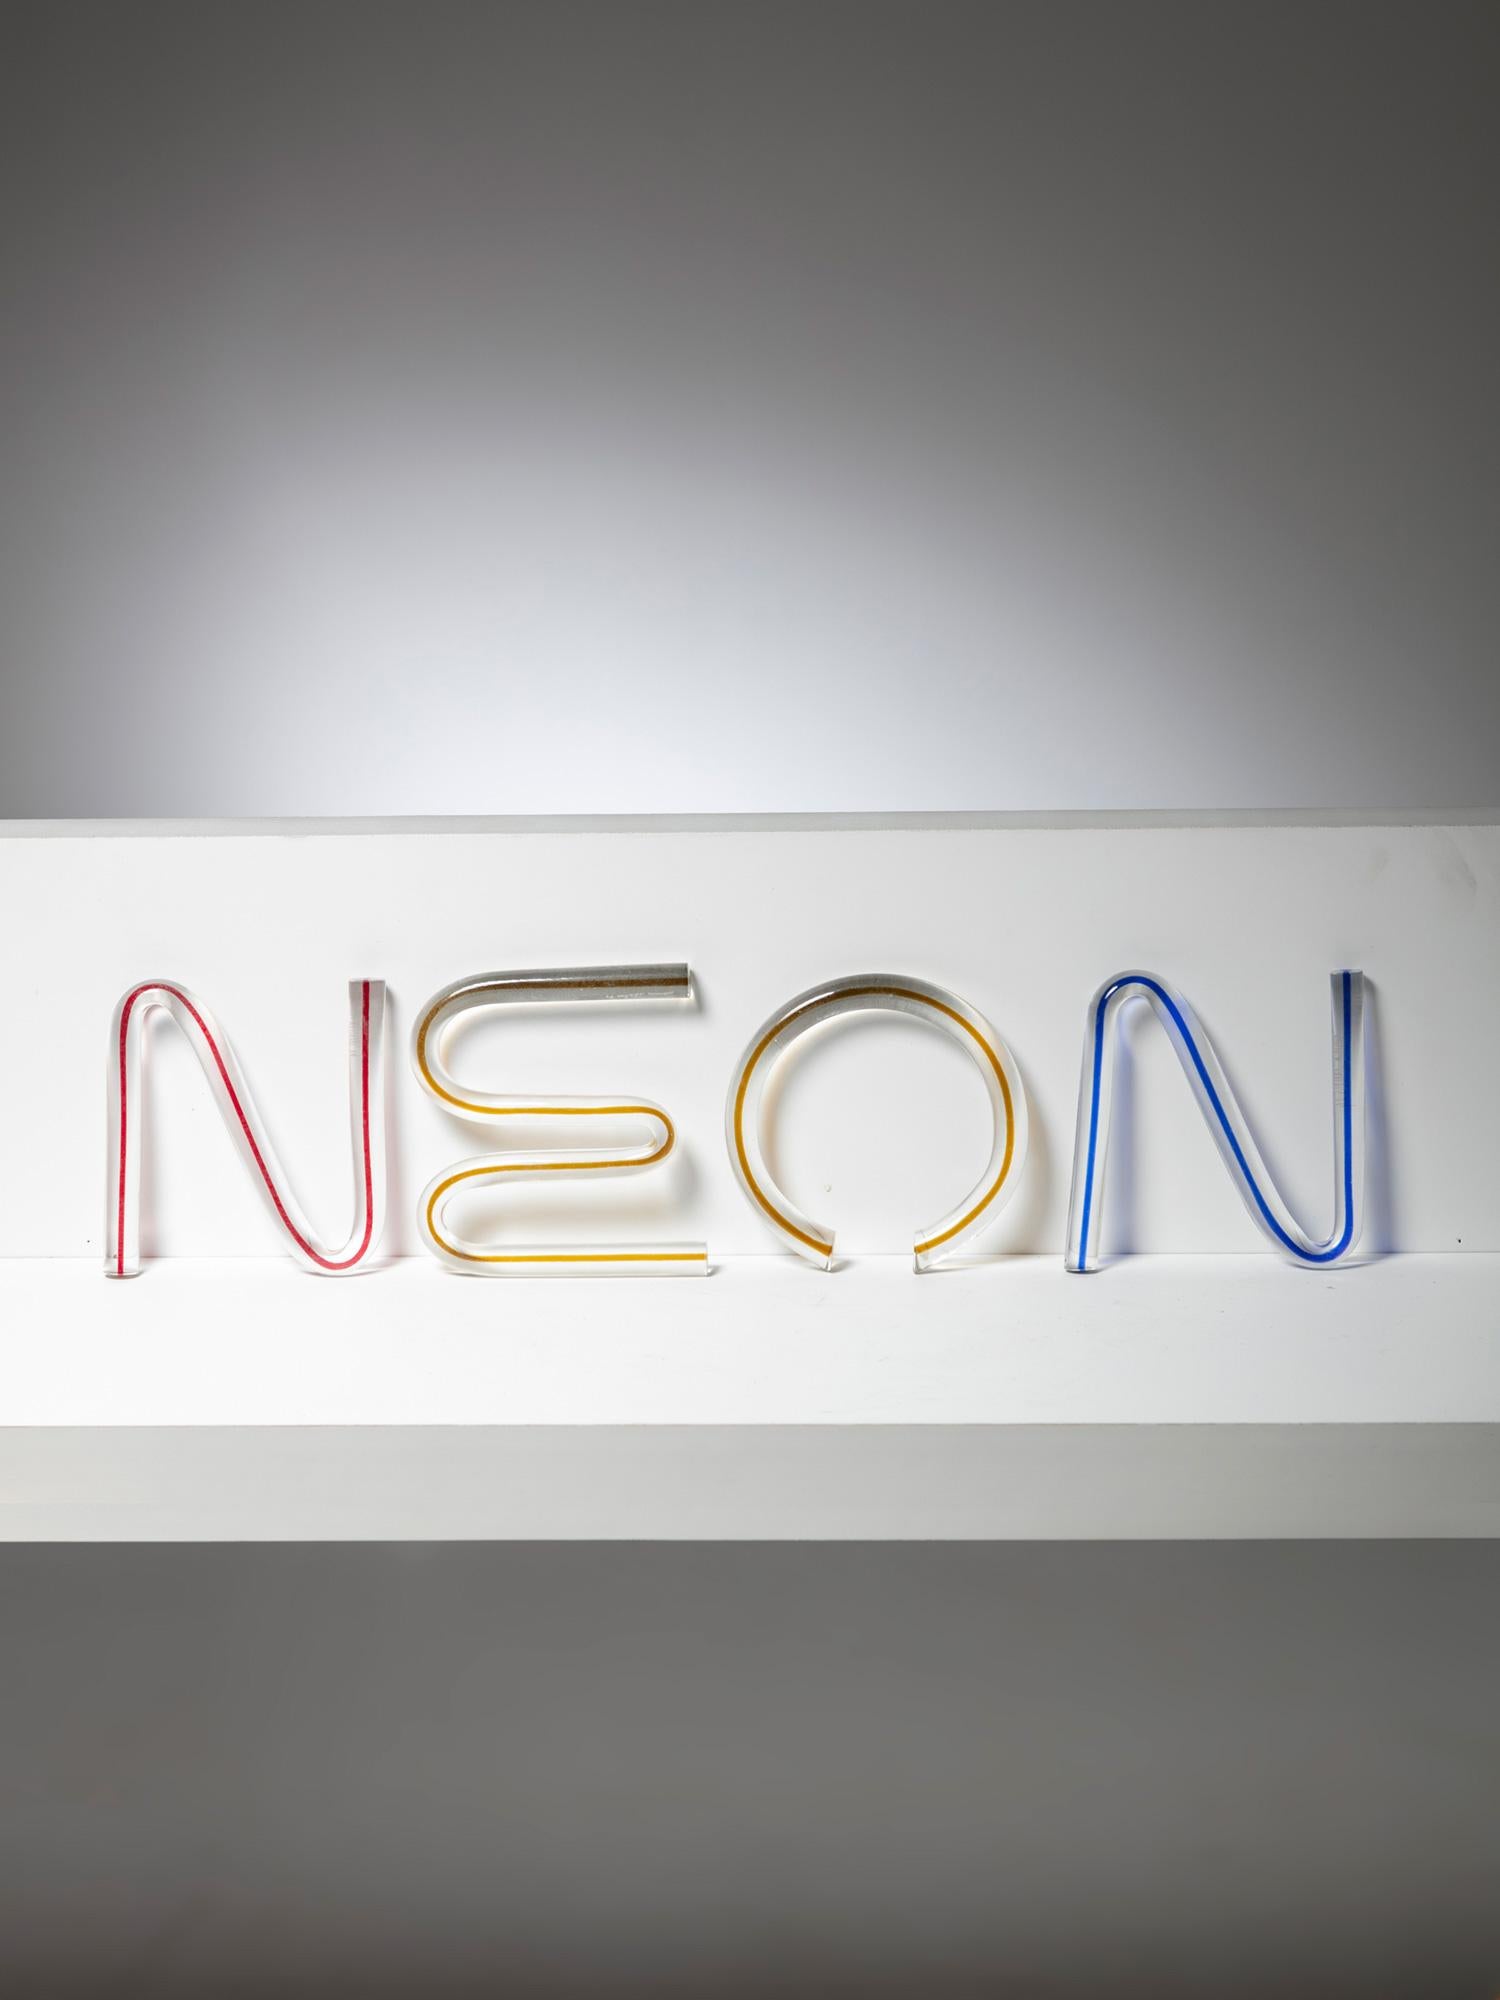 N, E, O, N crystal and colored capital letters by Massimo Vignelli for Venini.
Complete display set for Neon collection.